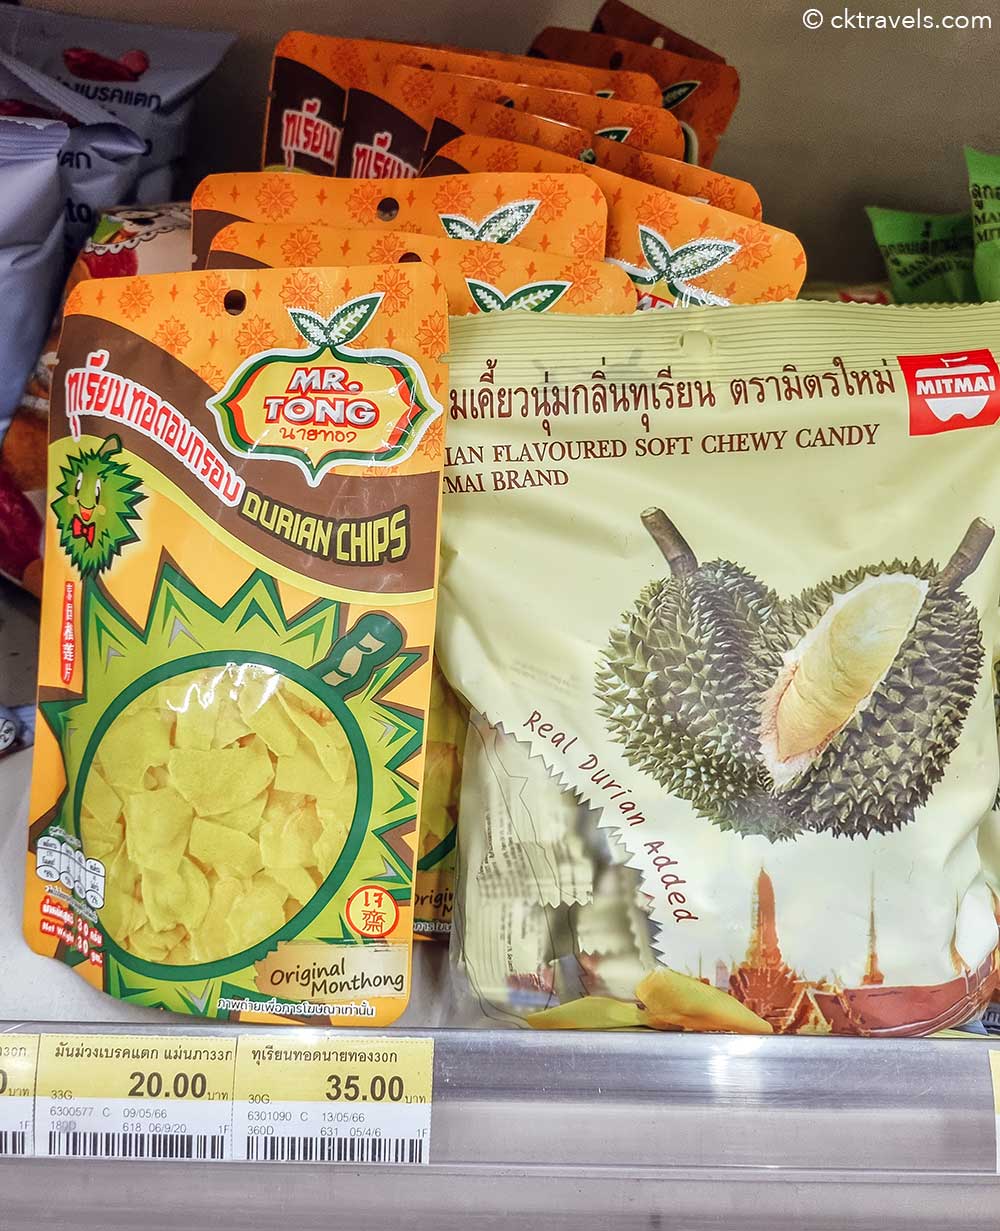 Durian chips and durian candy Thailand